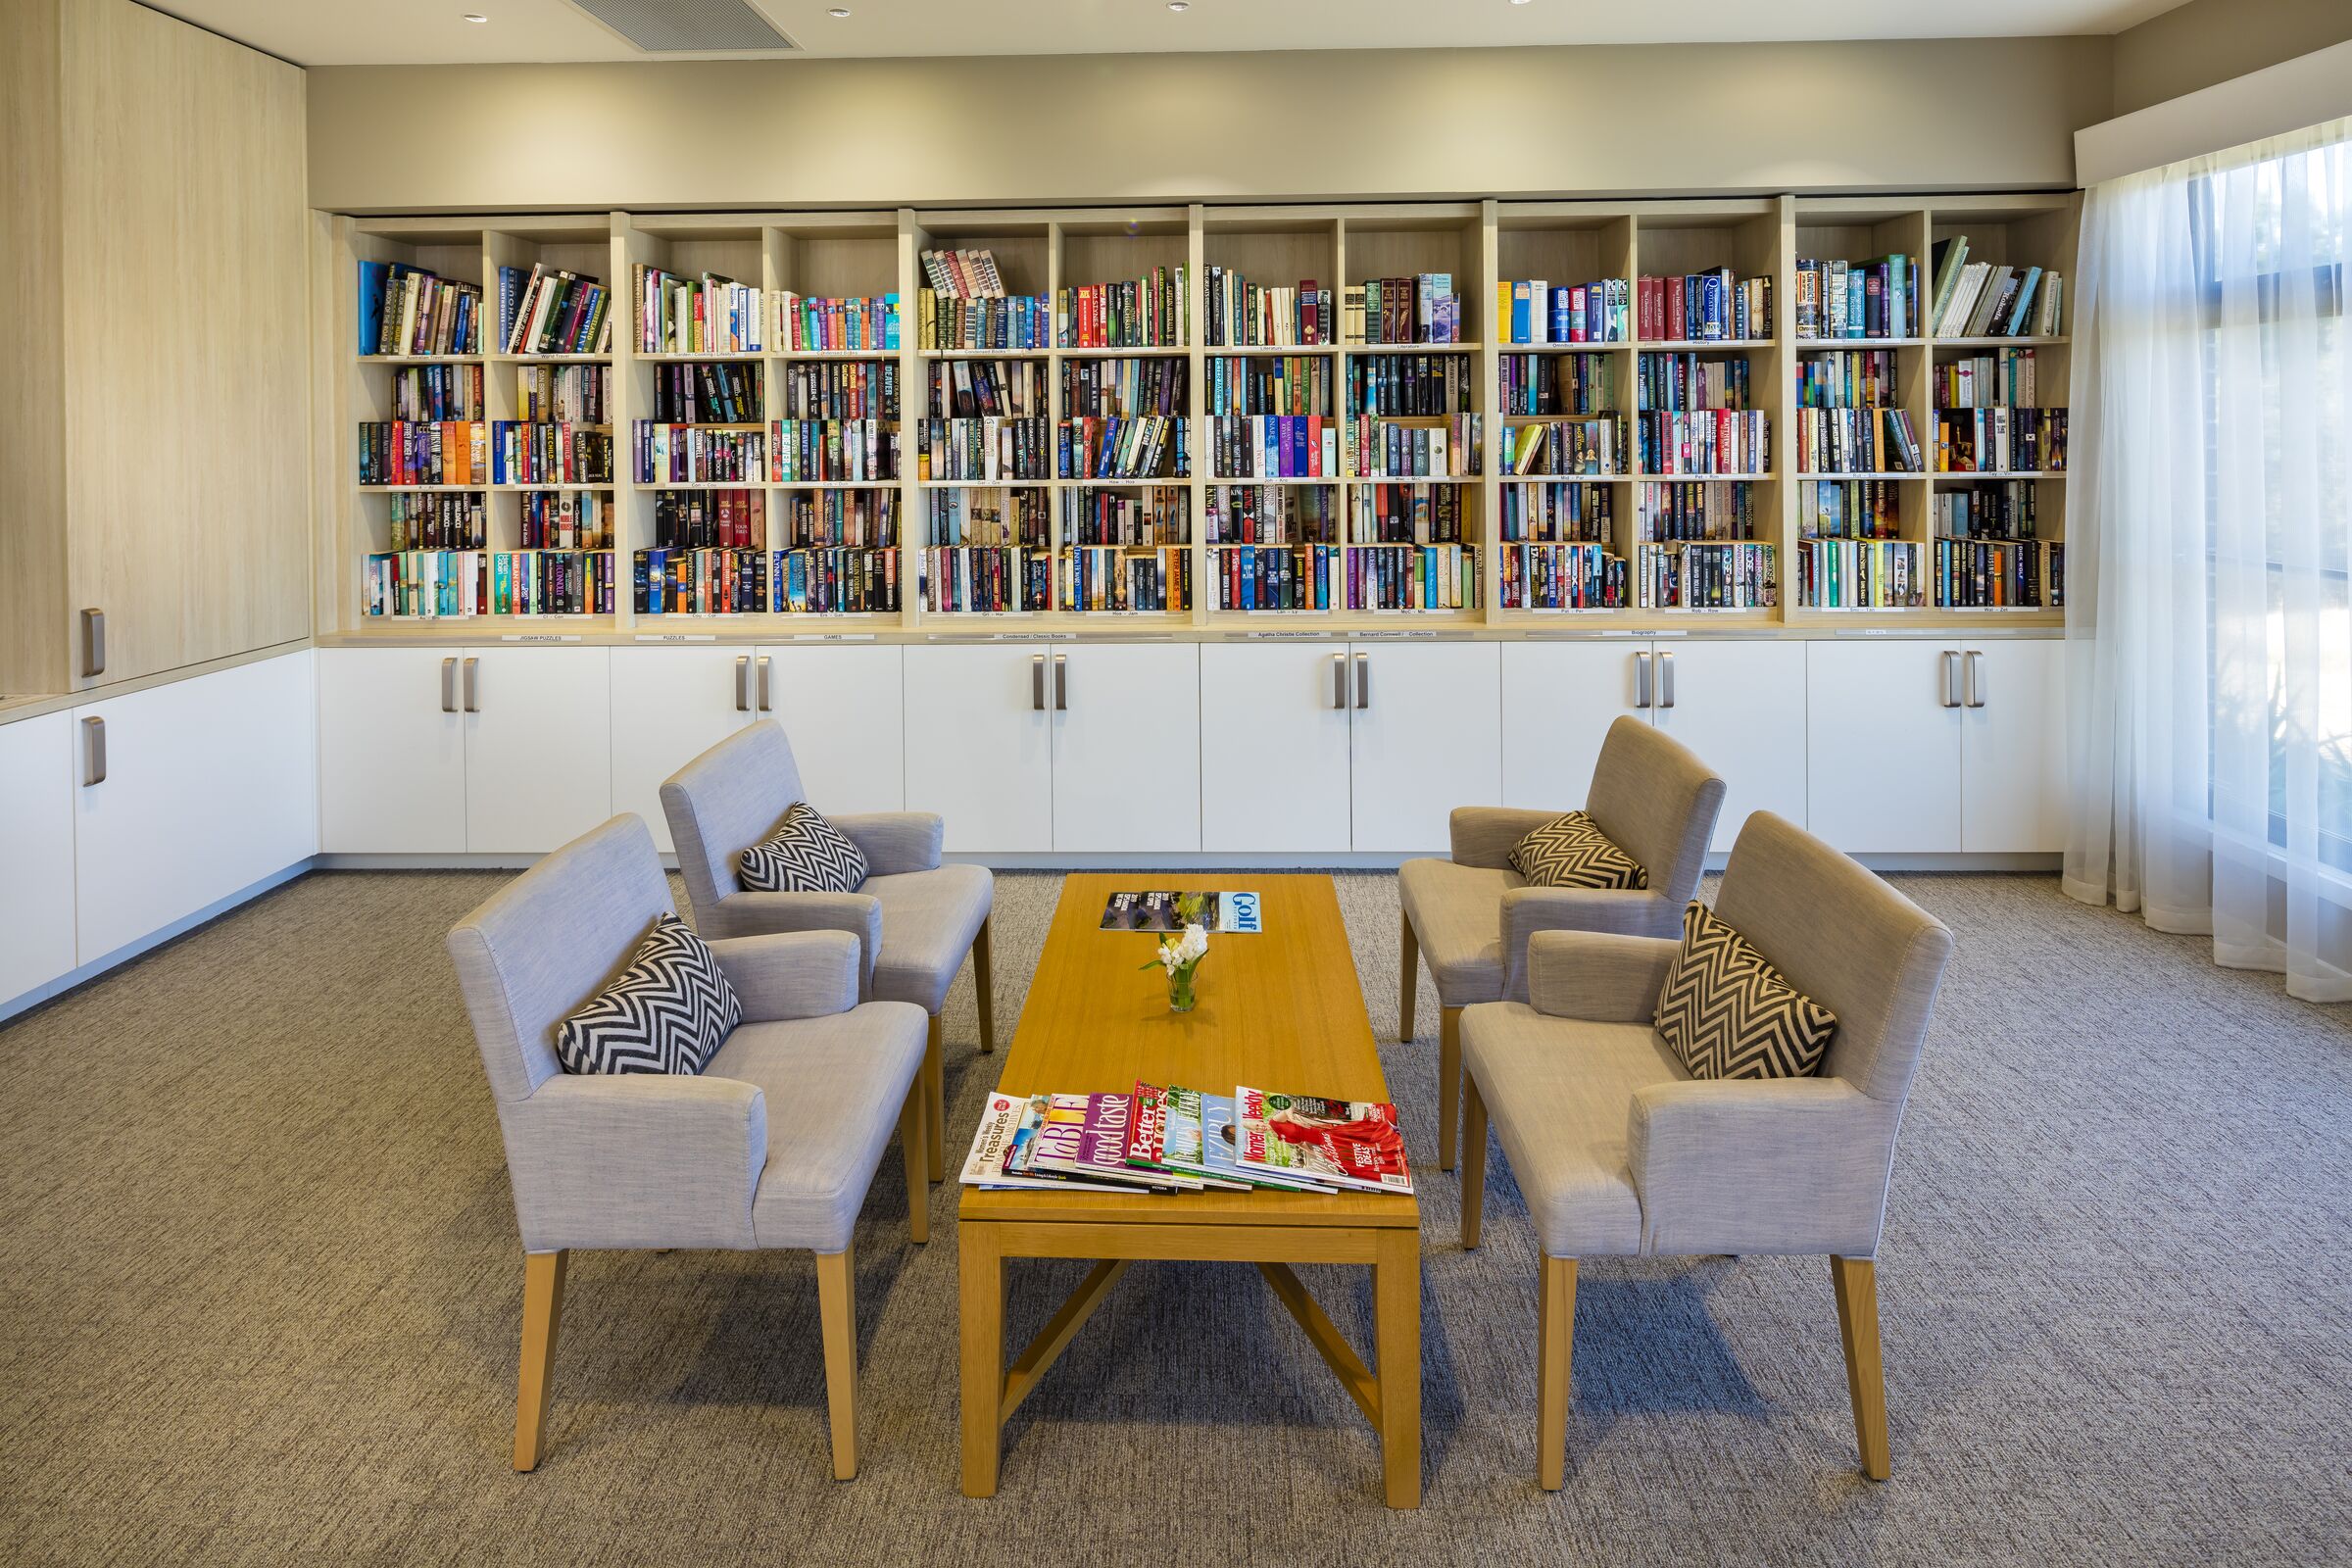 The Links at Waterford library room with well stocked bookcases and seating